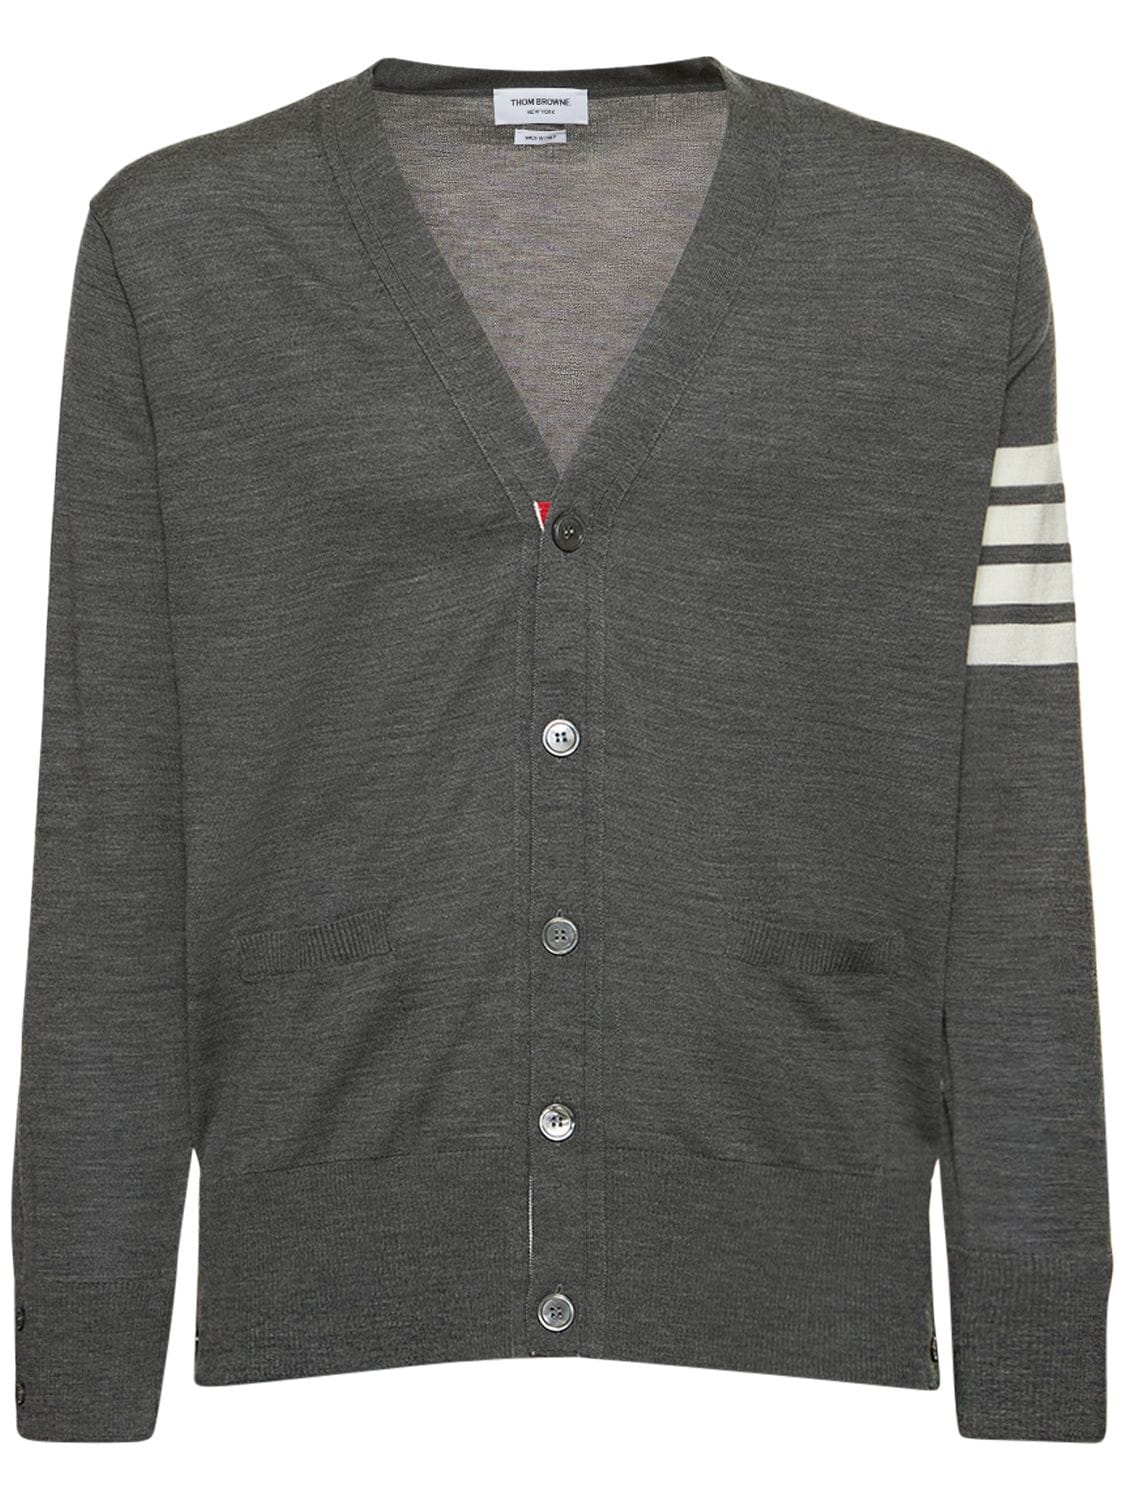 Thom Browne Funmix 4 Bar Jaquard Crew Knit, Brand Size 4 (us Size 40) In Med Grey